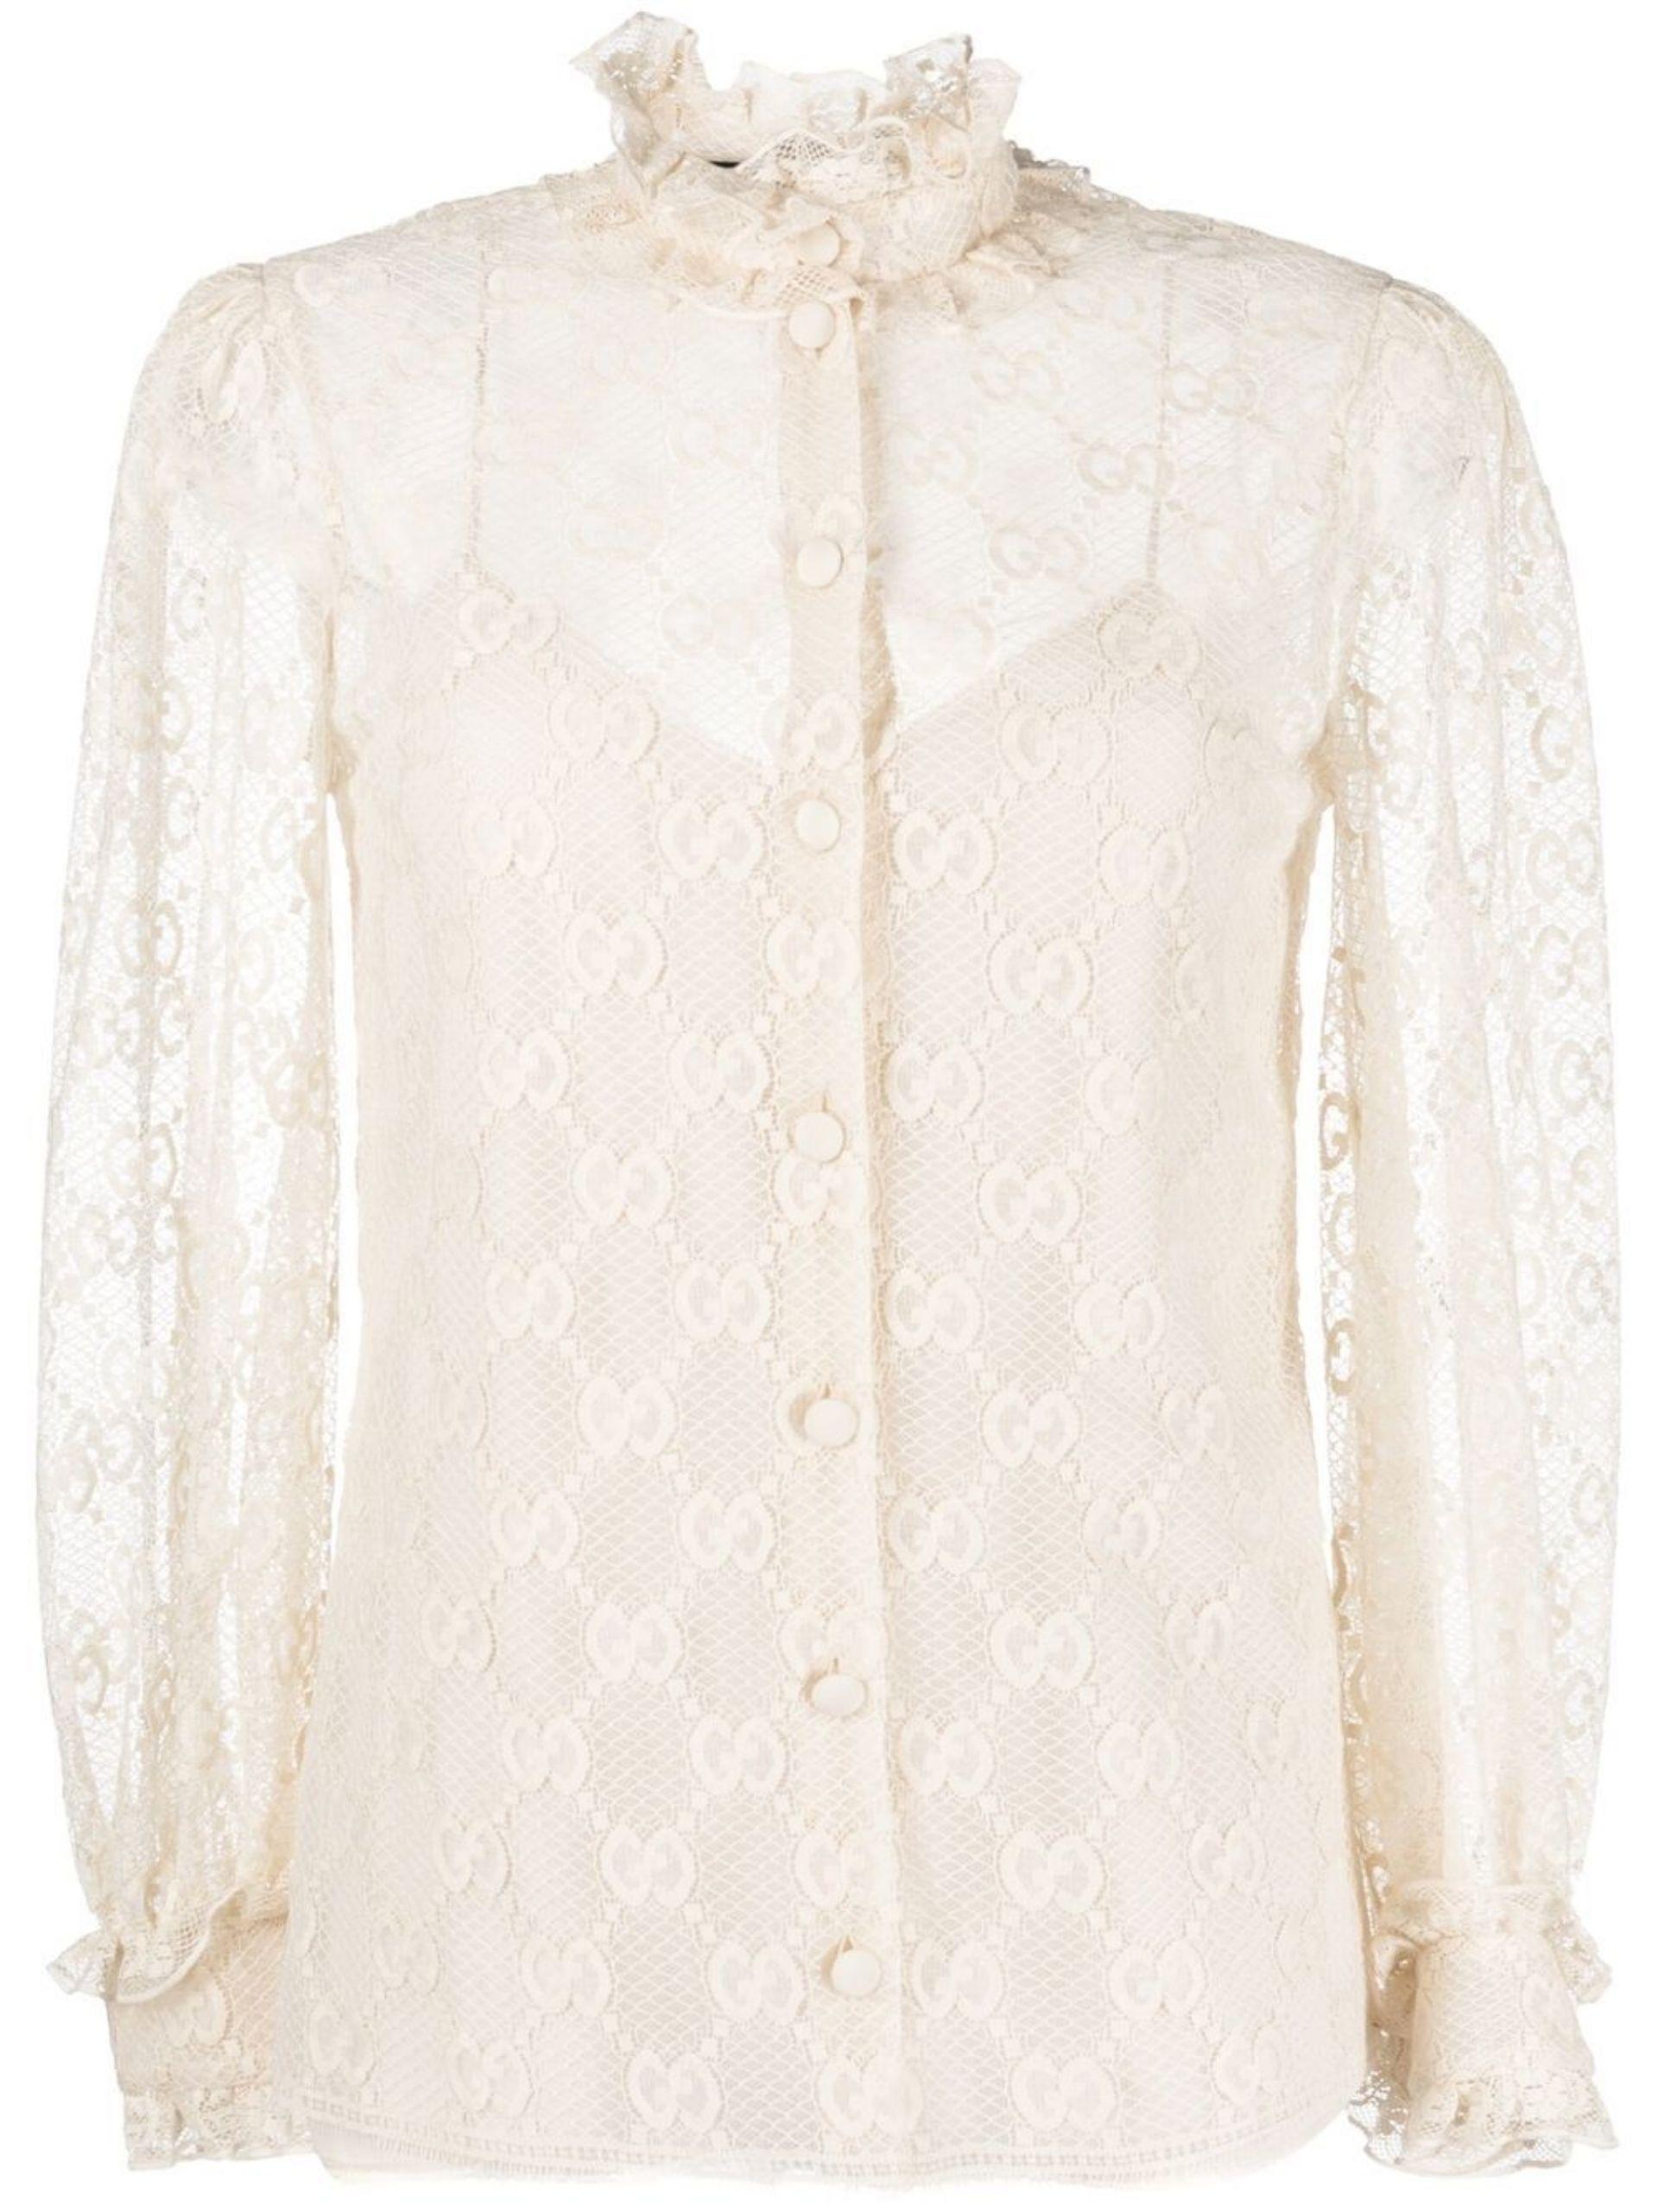 Gucci Frilled Monogram Lace Blouse in Natural | Lyst